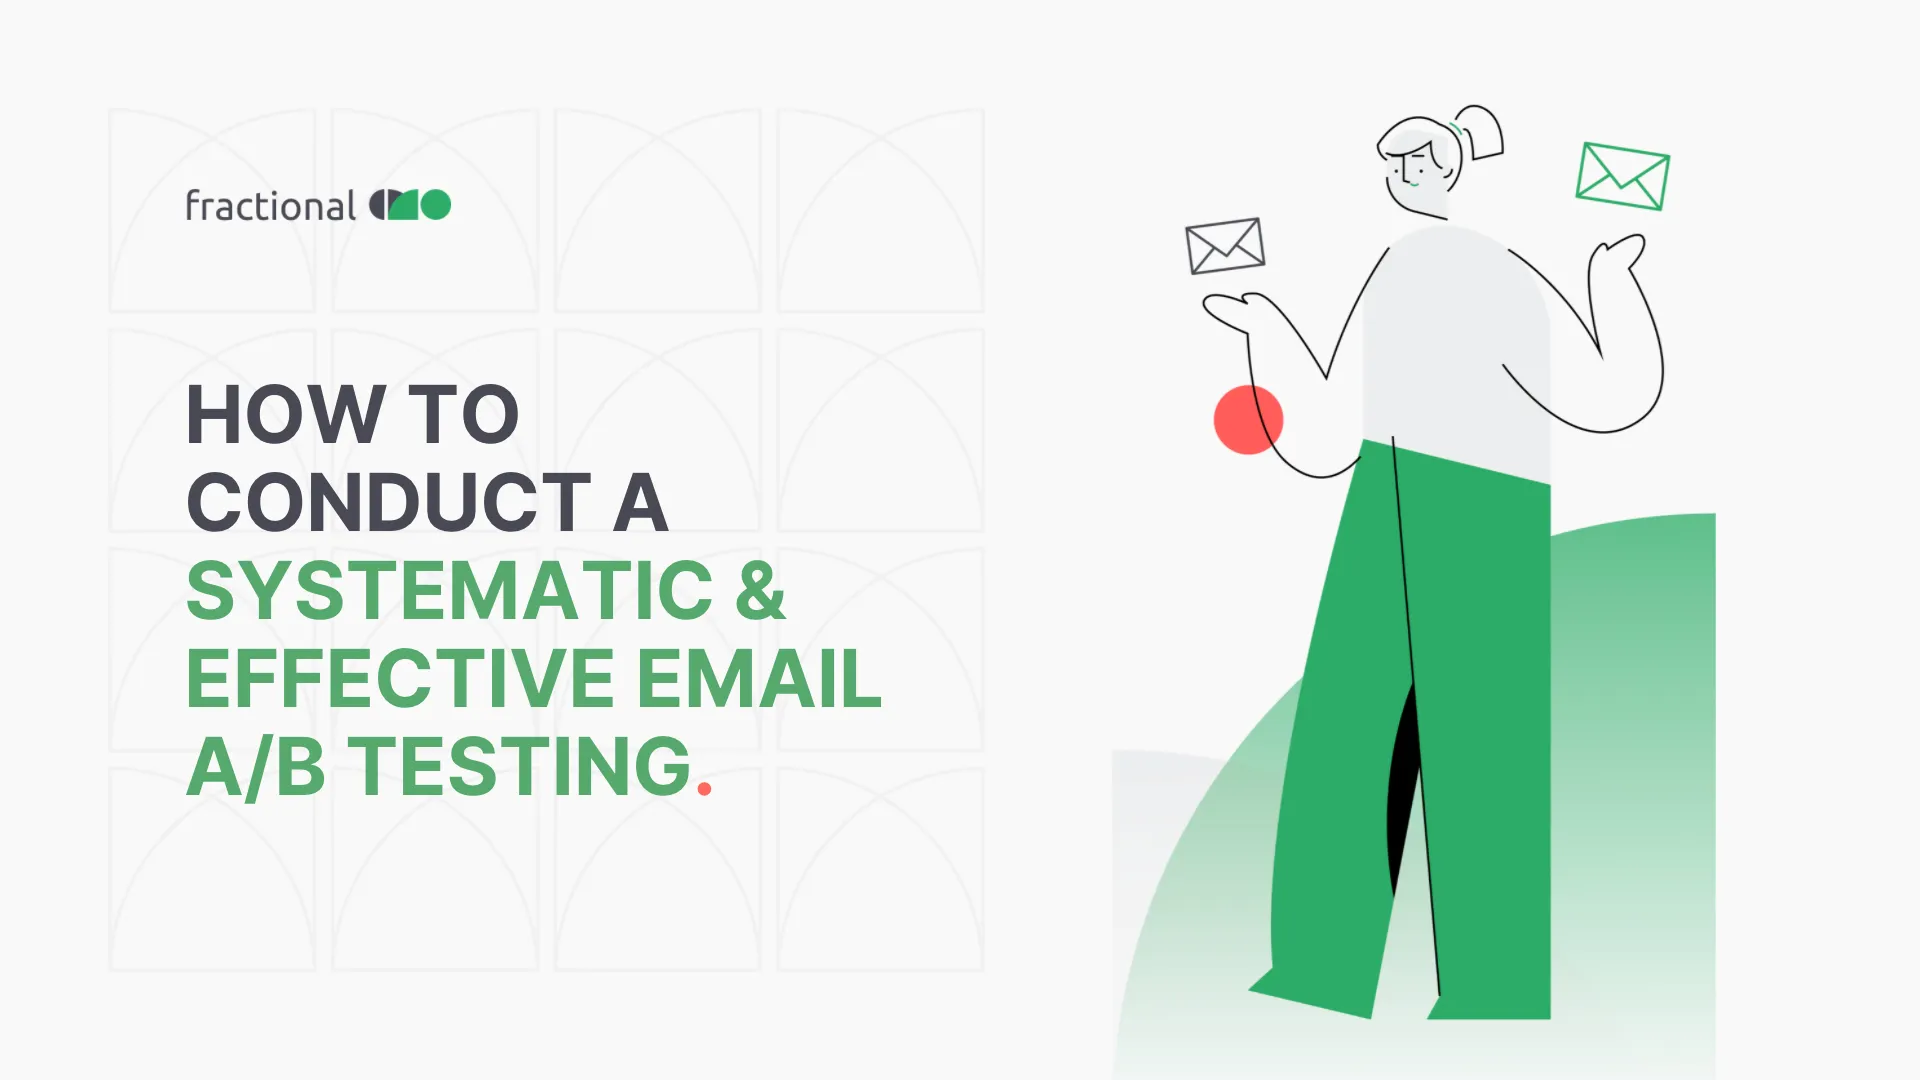 How To Conduct A Systematic And Effective Email A/B Testing